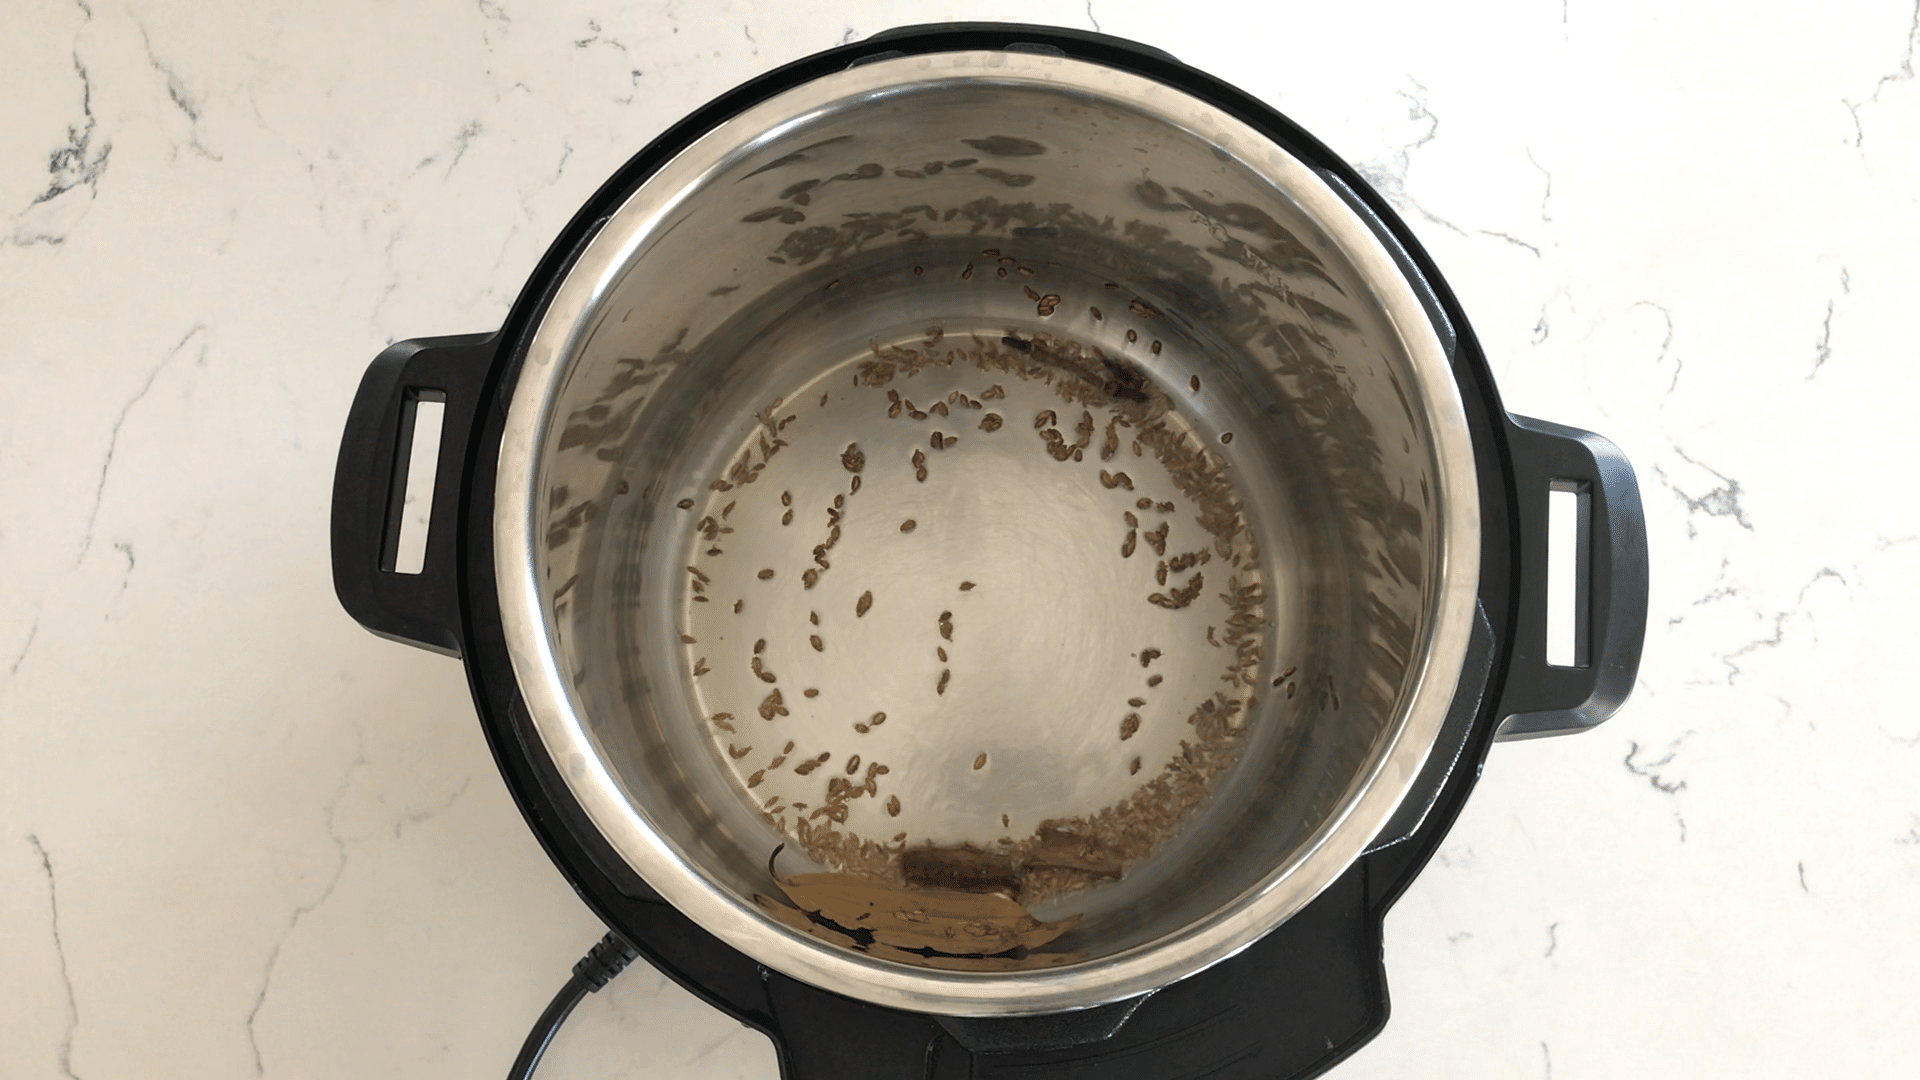 Instant Pot and spices